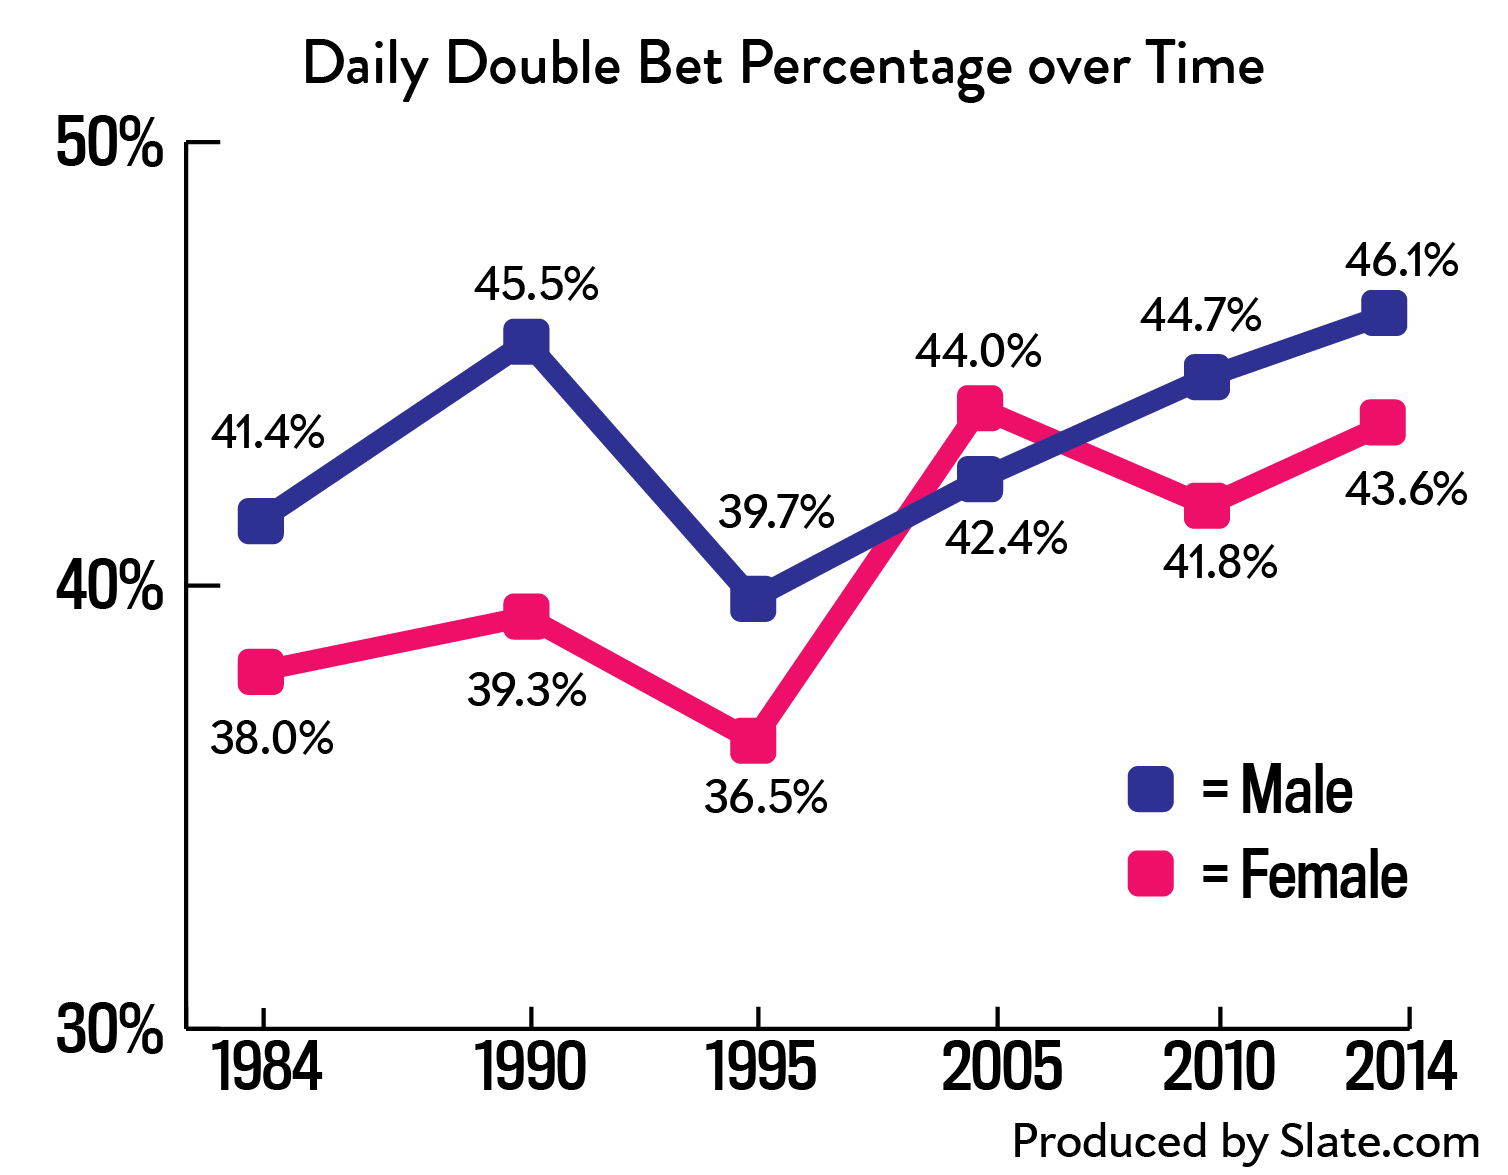 Daily Double bet percentage over time.